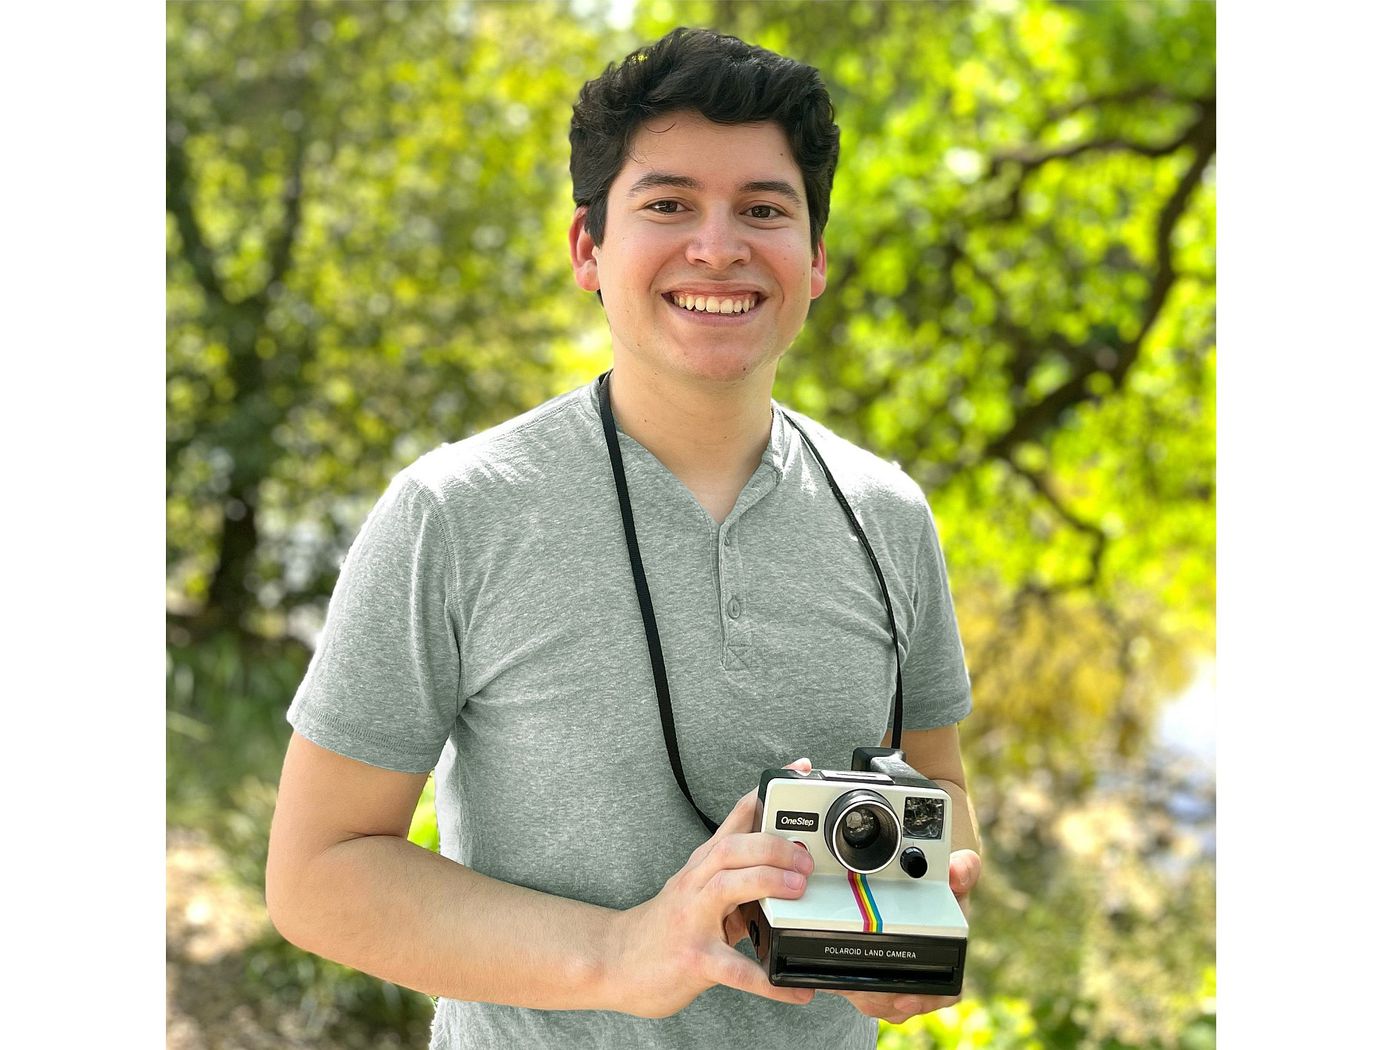 Marc Corfmat is the fan designer behind this set — here, he’s holding the original Polaroid OneStep SX-70 instant camera.